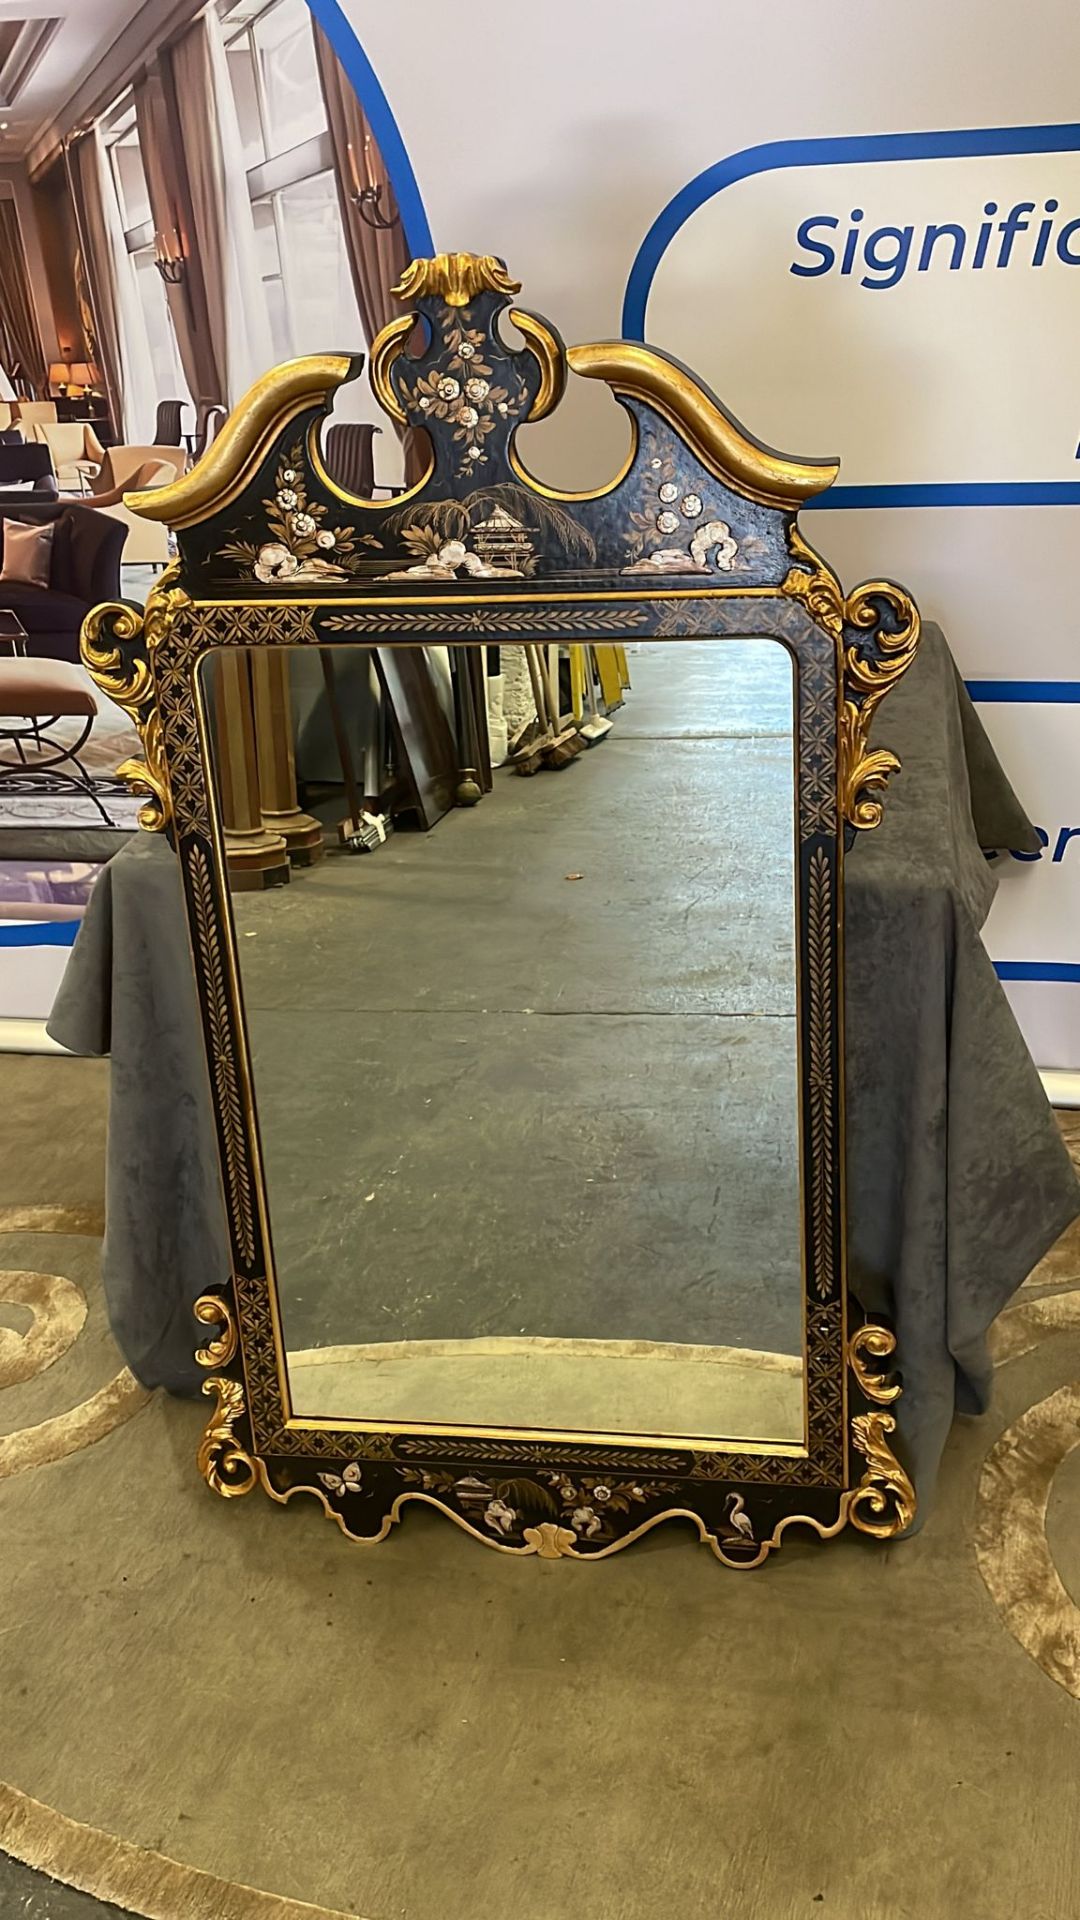 Chinoiserie black lacquer ornate carved mirror with gilt detail 72 x 125cm - Bild 2 aus 3